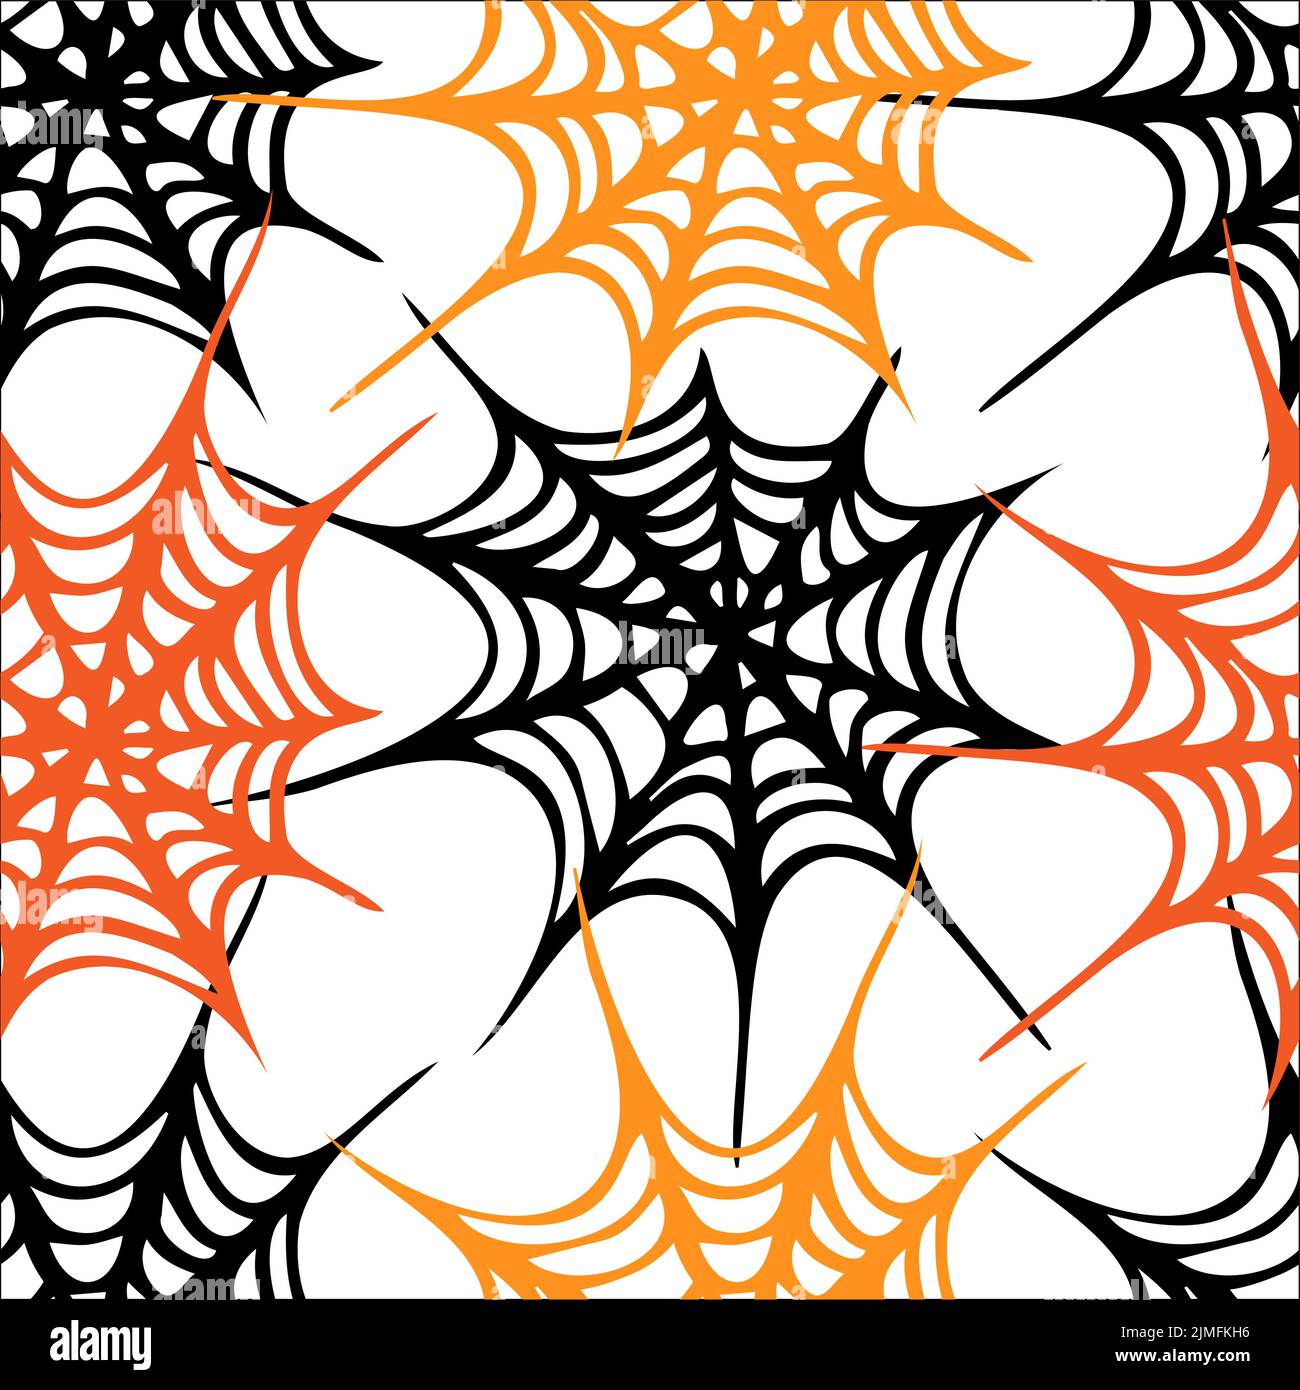 Spider web seamless pattern Stock Vector